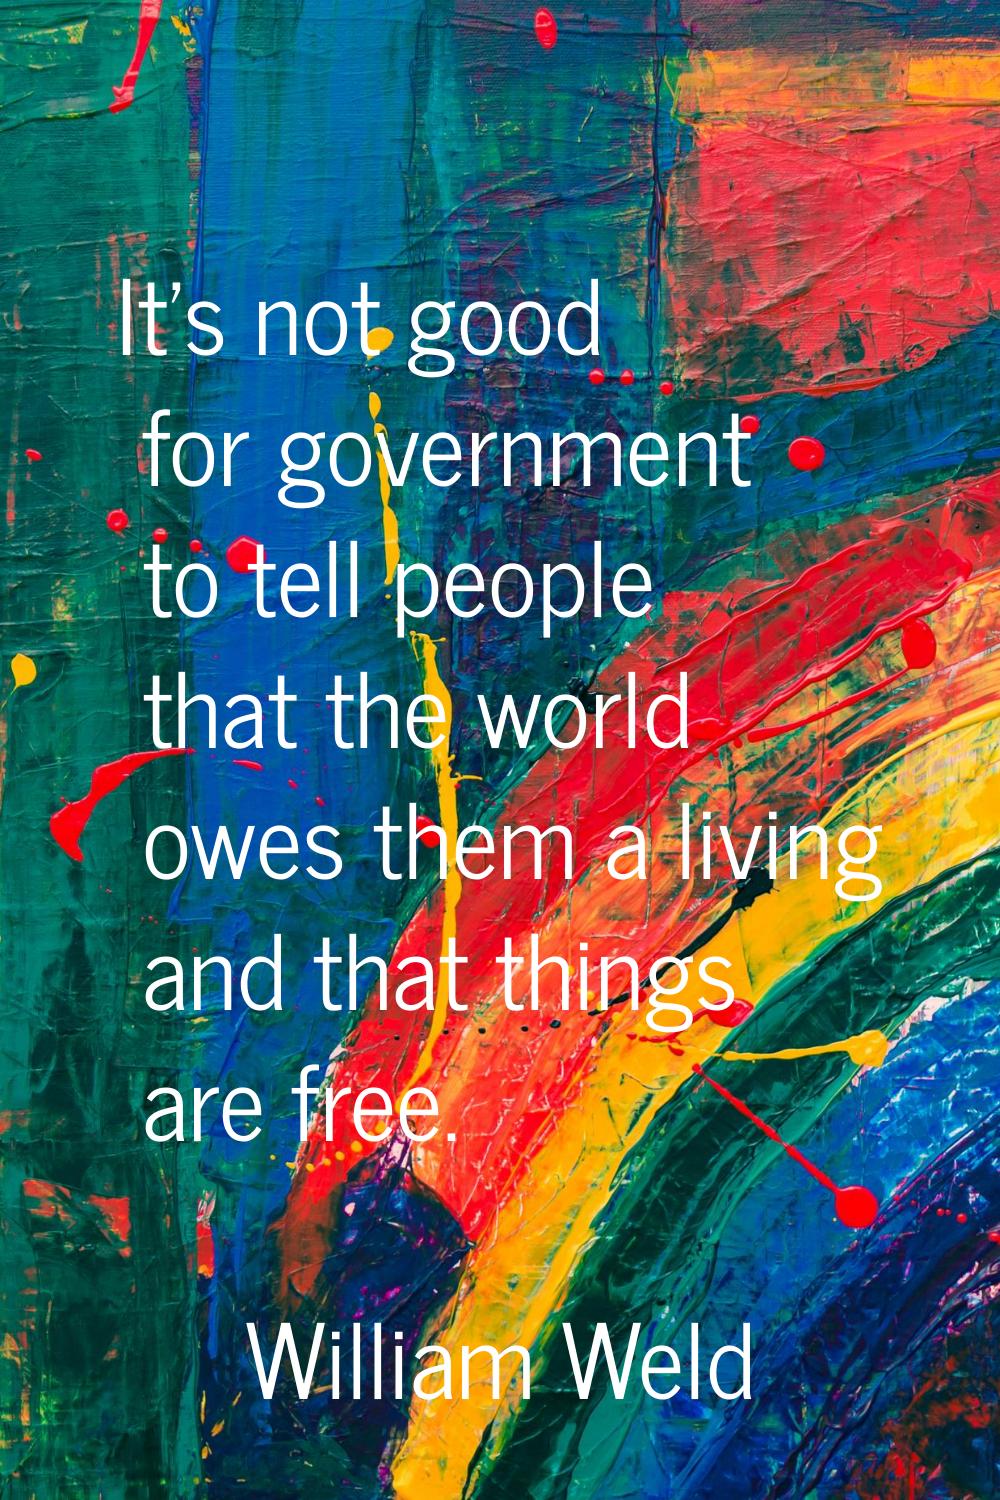 It's not good for government to tell people that the world owes them a living and that things are f